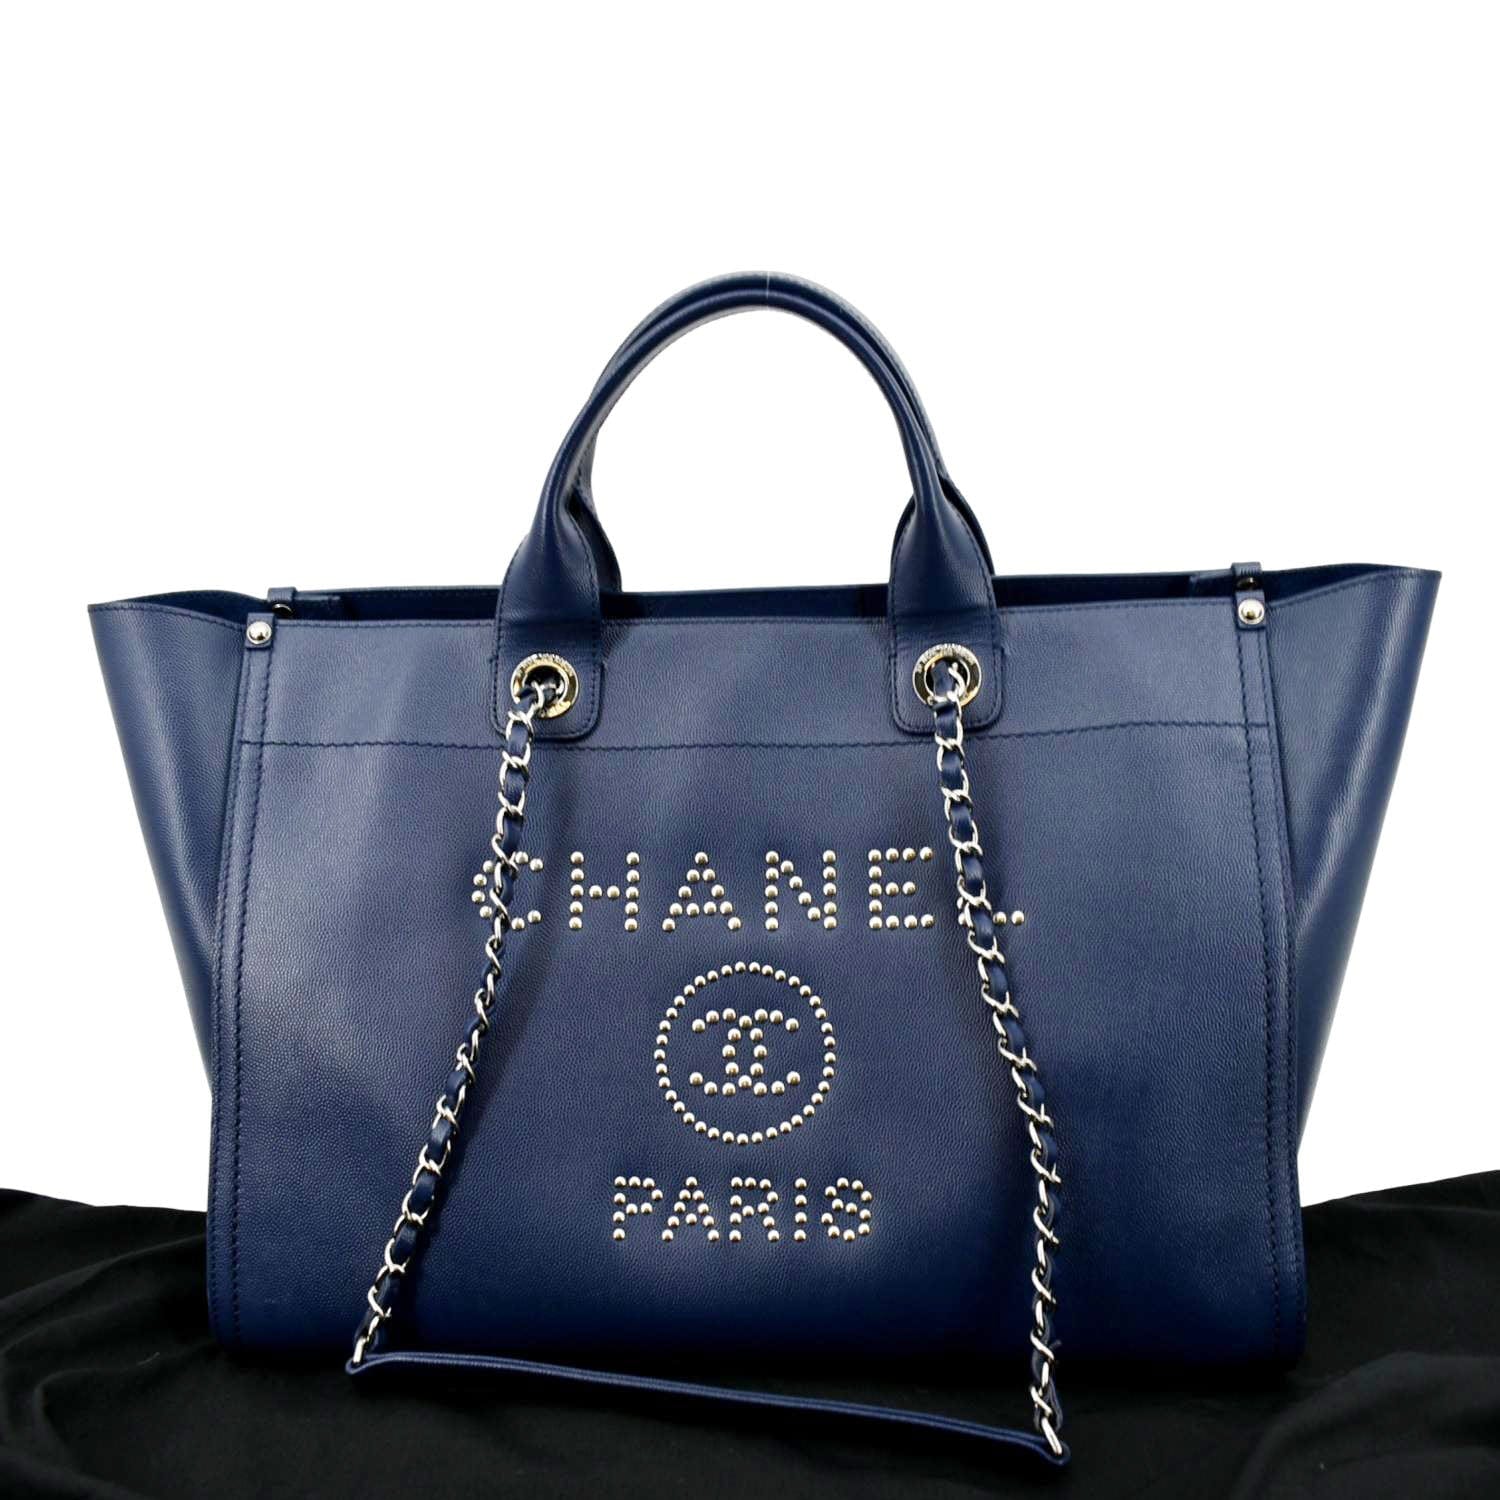 deauville chanel tote bag large